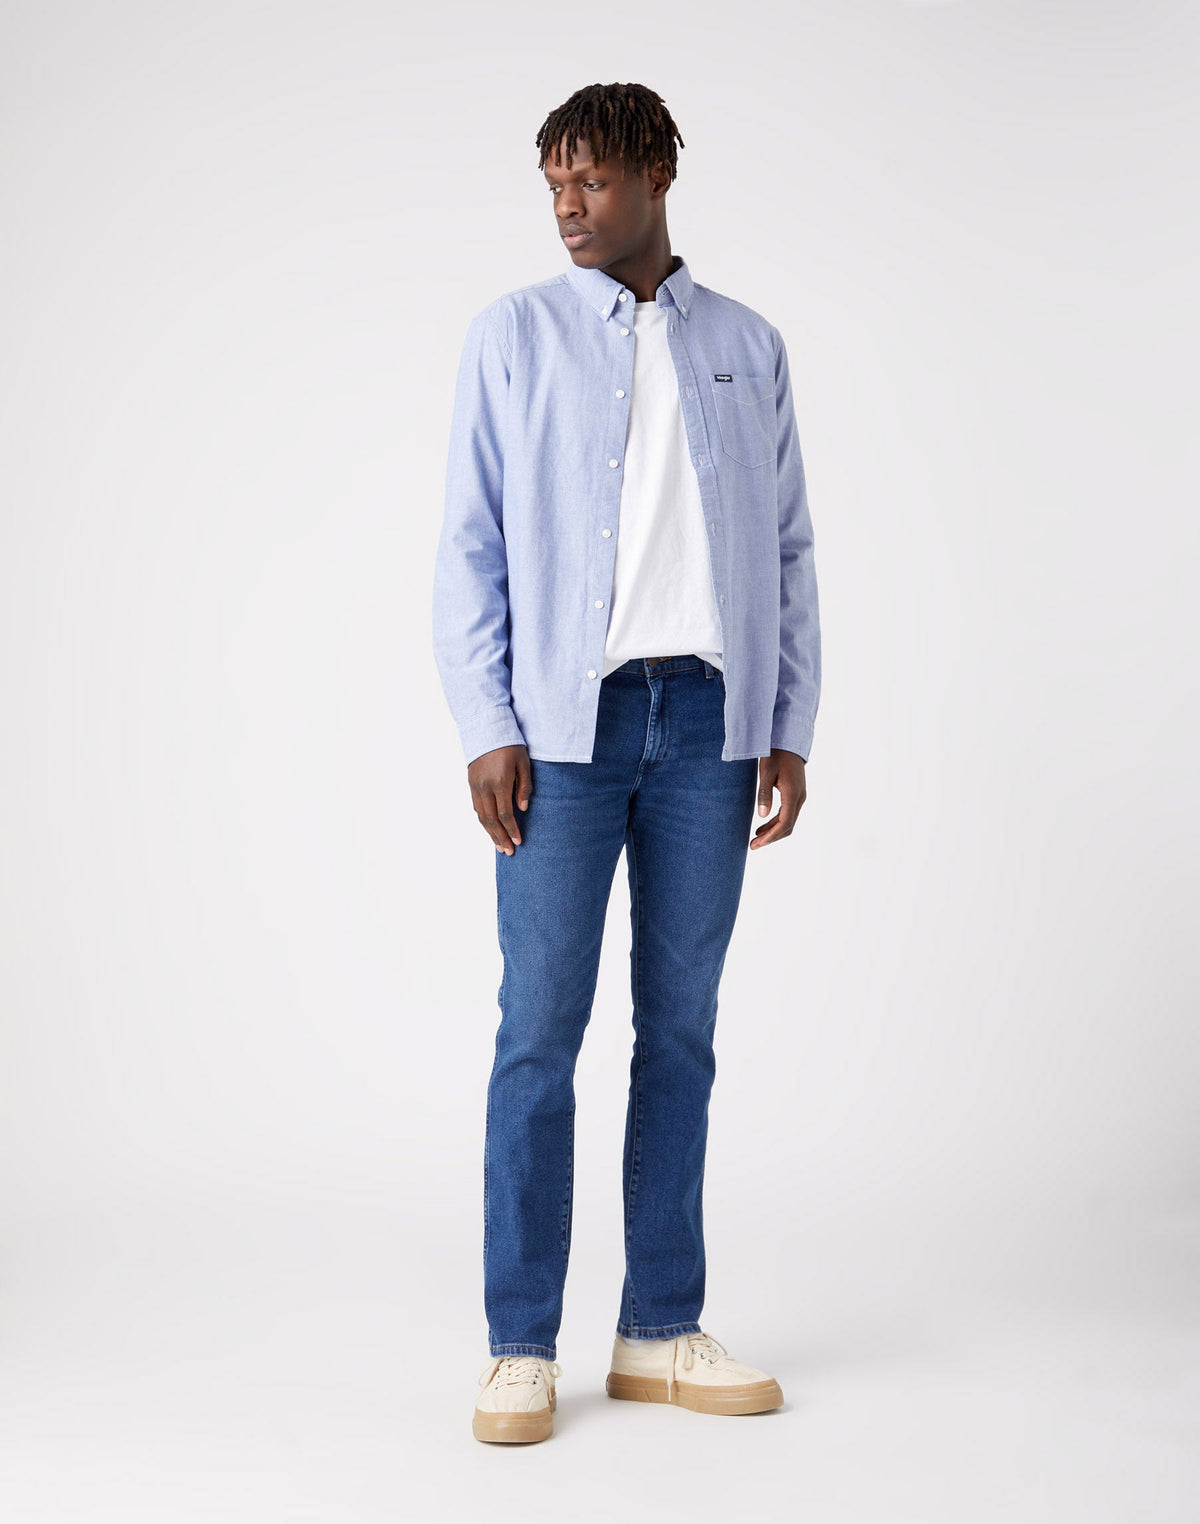 One Pocket Button Down Shirt in Blue Tint